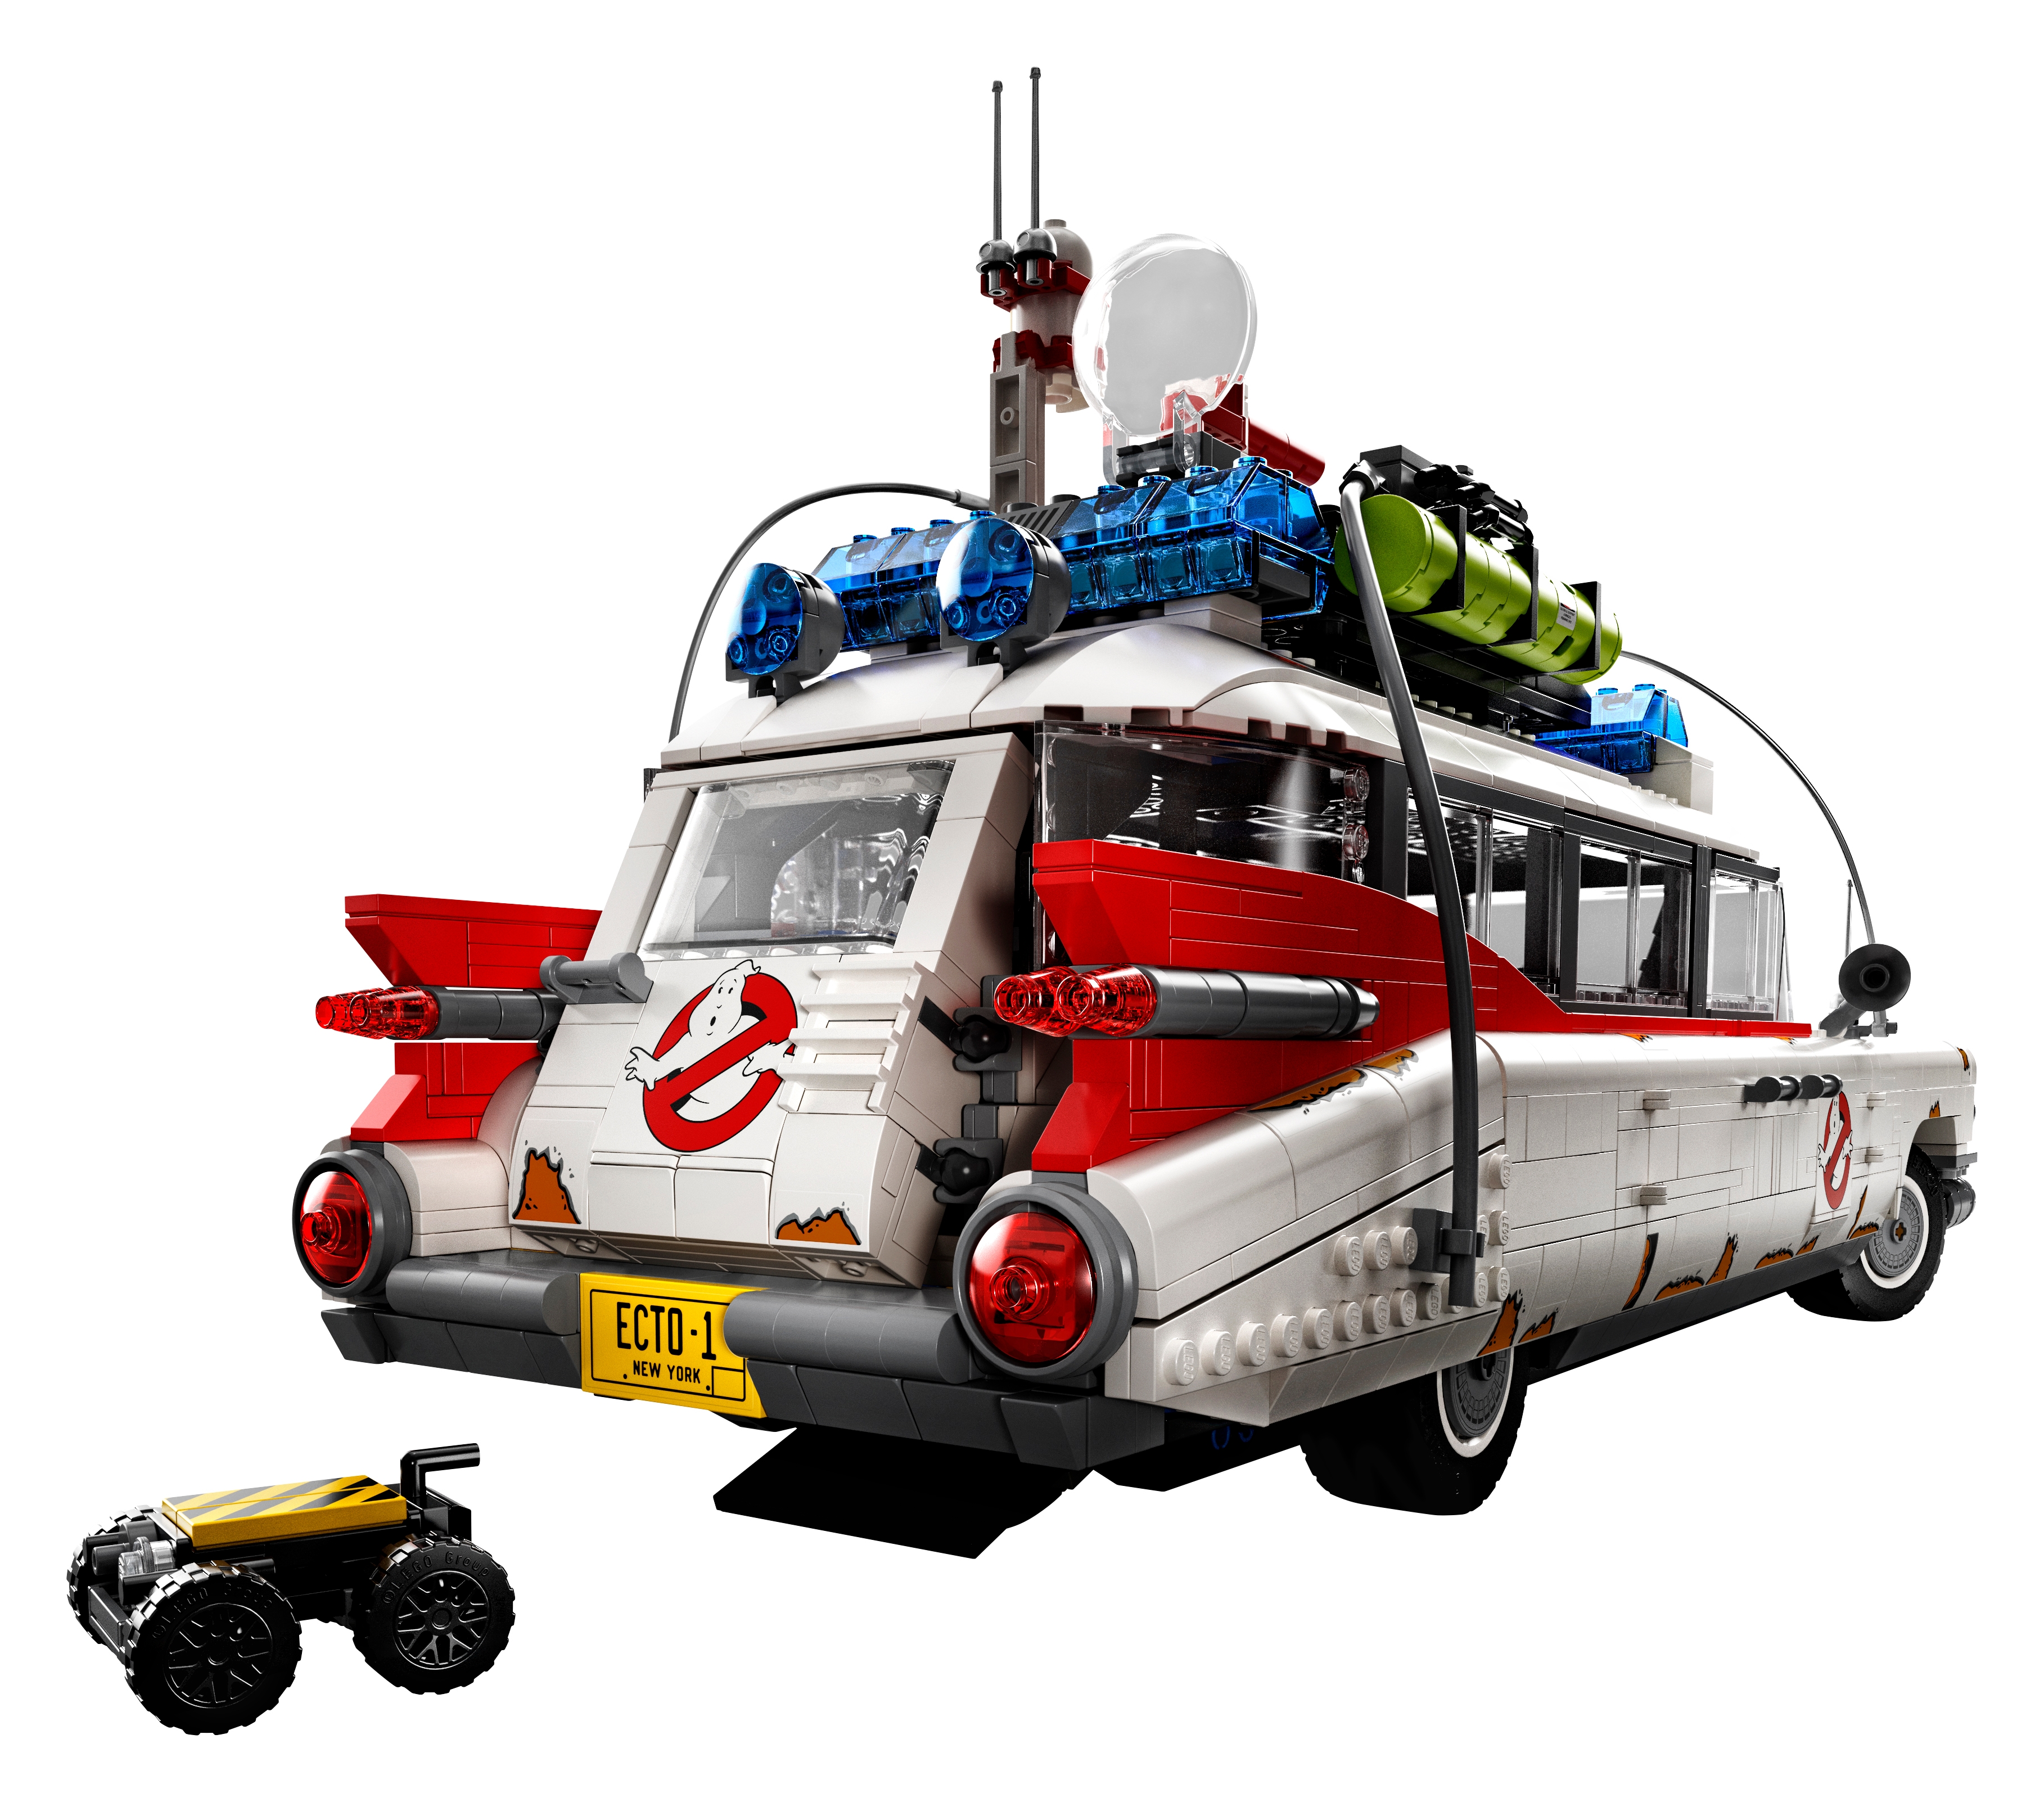 Ghostbusters™ ECTO-1 10274 | LEGO® Icons | Buy online at the